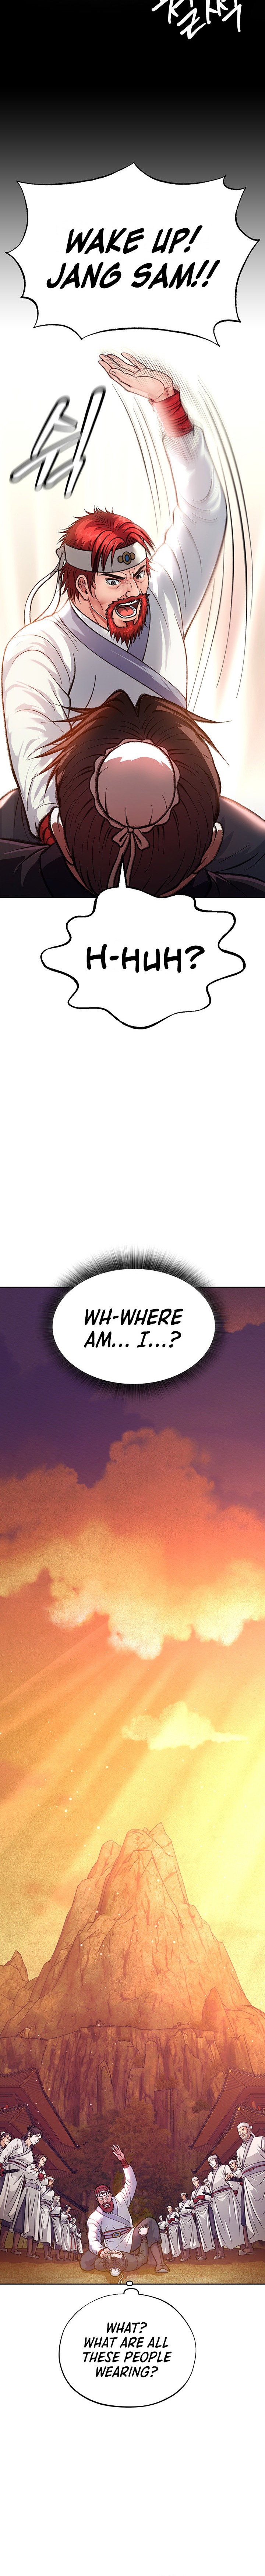 I Ended Up in the World of Murim - Chapter 1 Page 6